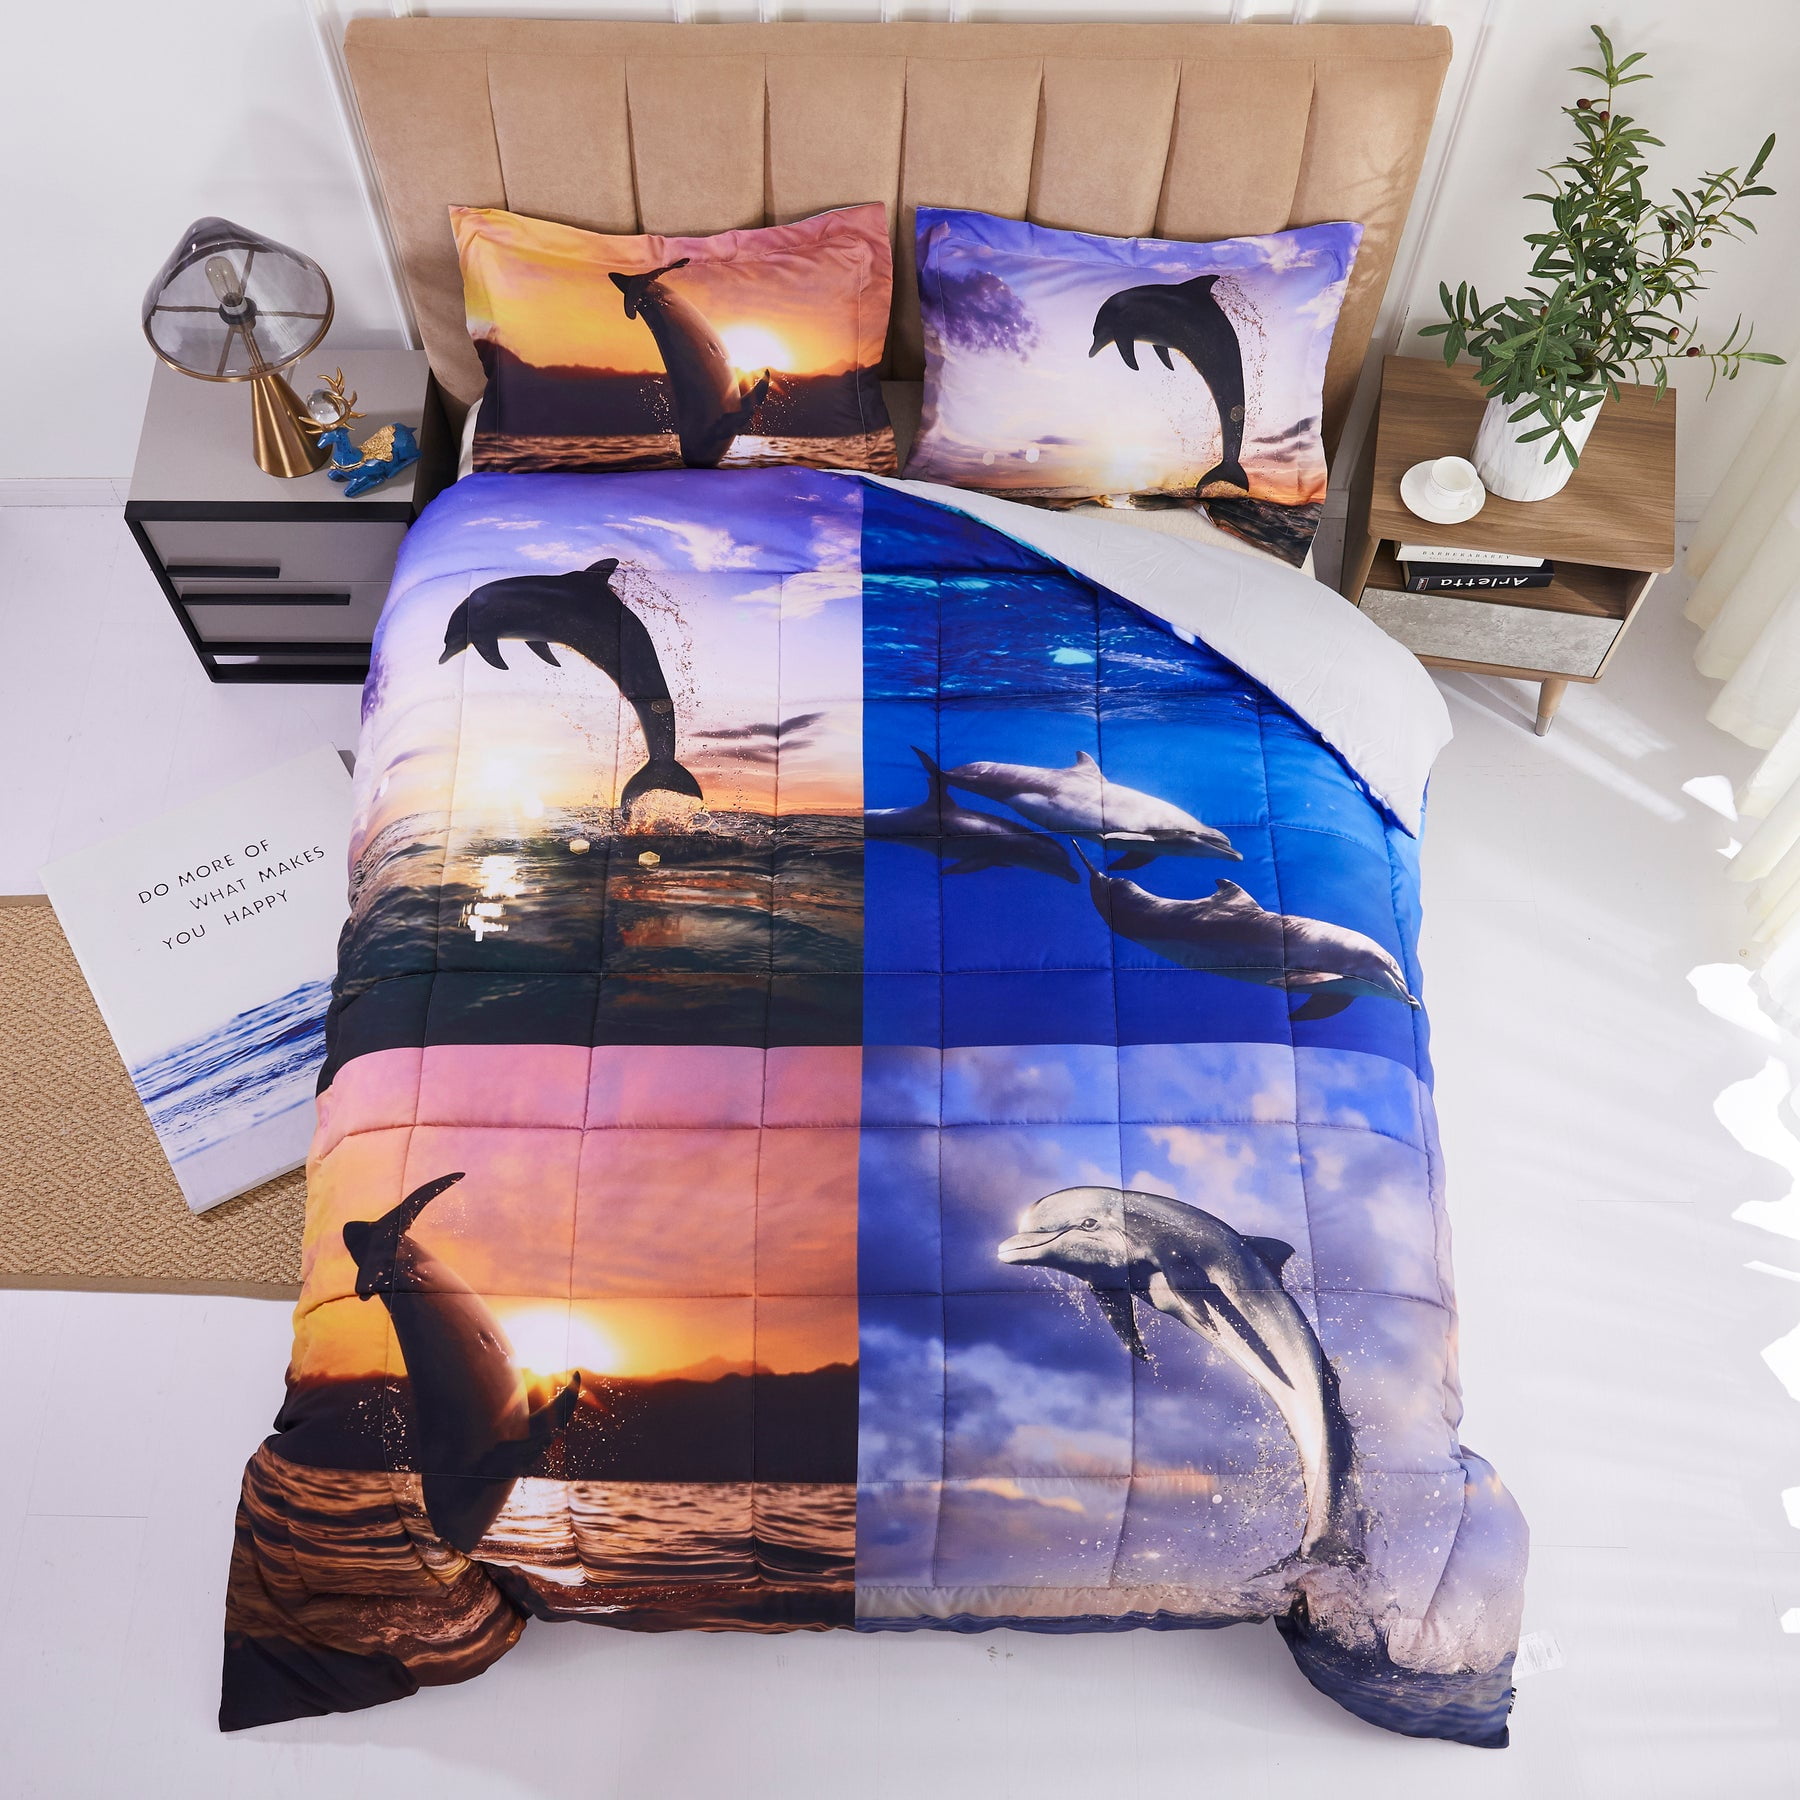 Cozyvie Dolphins Jumping out of Blue Water Print Polyester 3D Bedding Set with Duvet Cover,Flat Sheet and Pillowcases,Twin/Full/Queen Size,Blue,No Comforter Extra Long Twin 